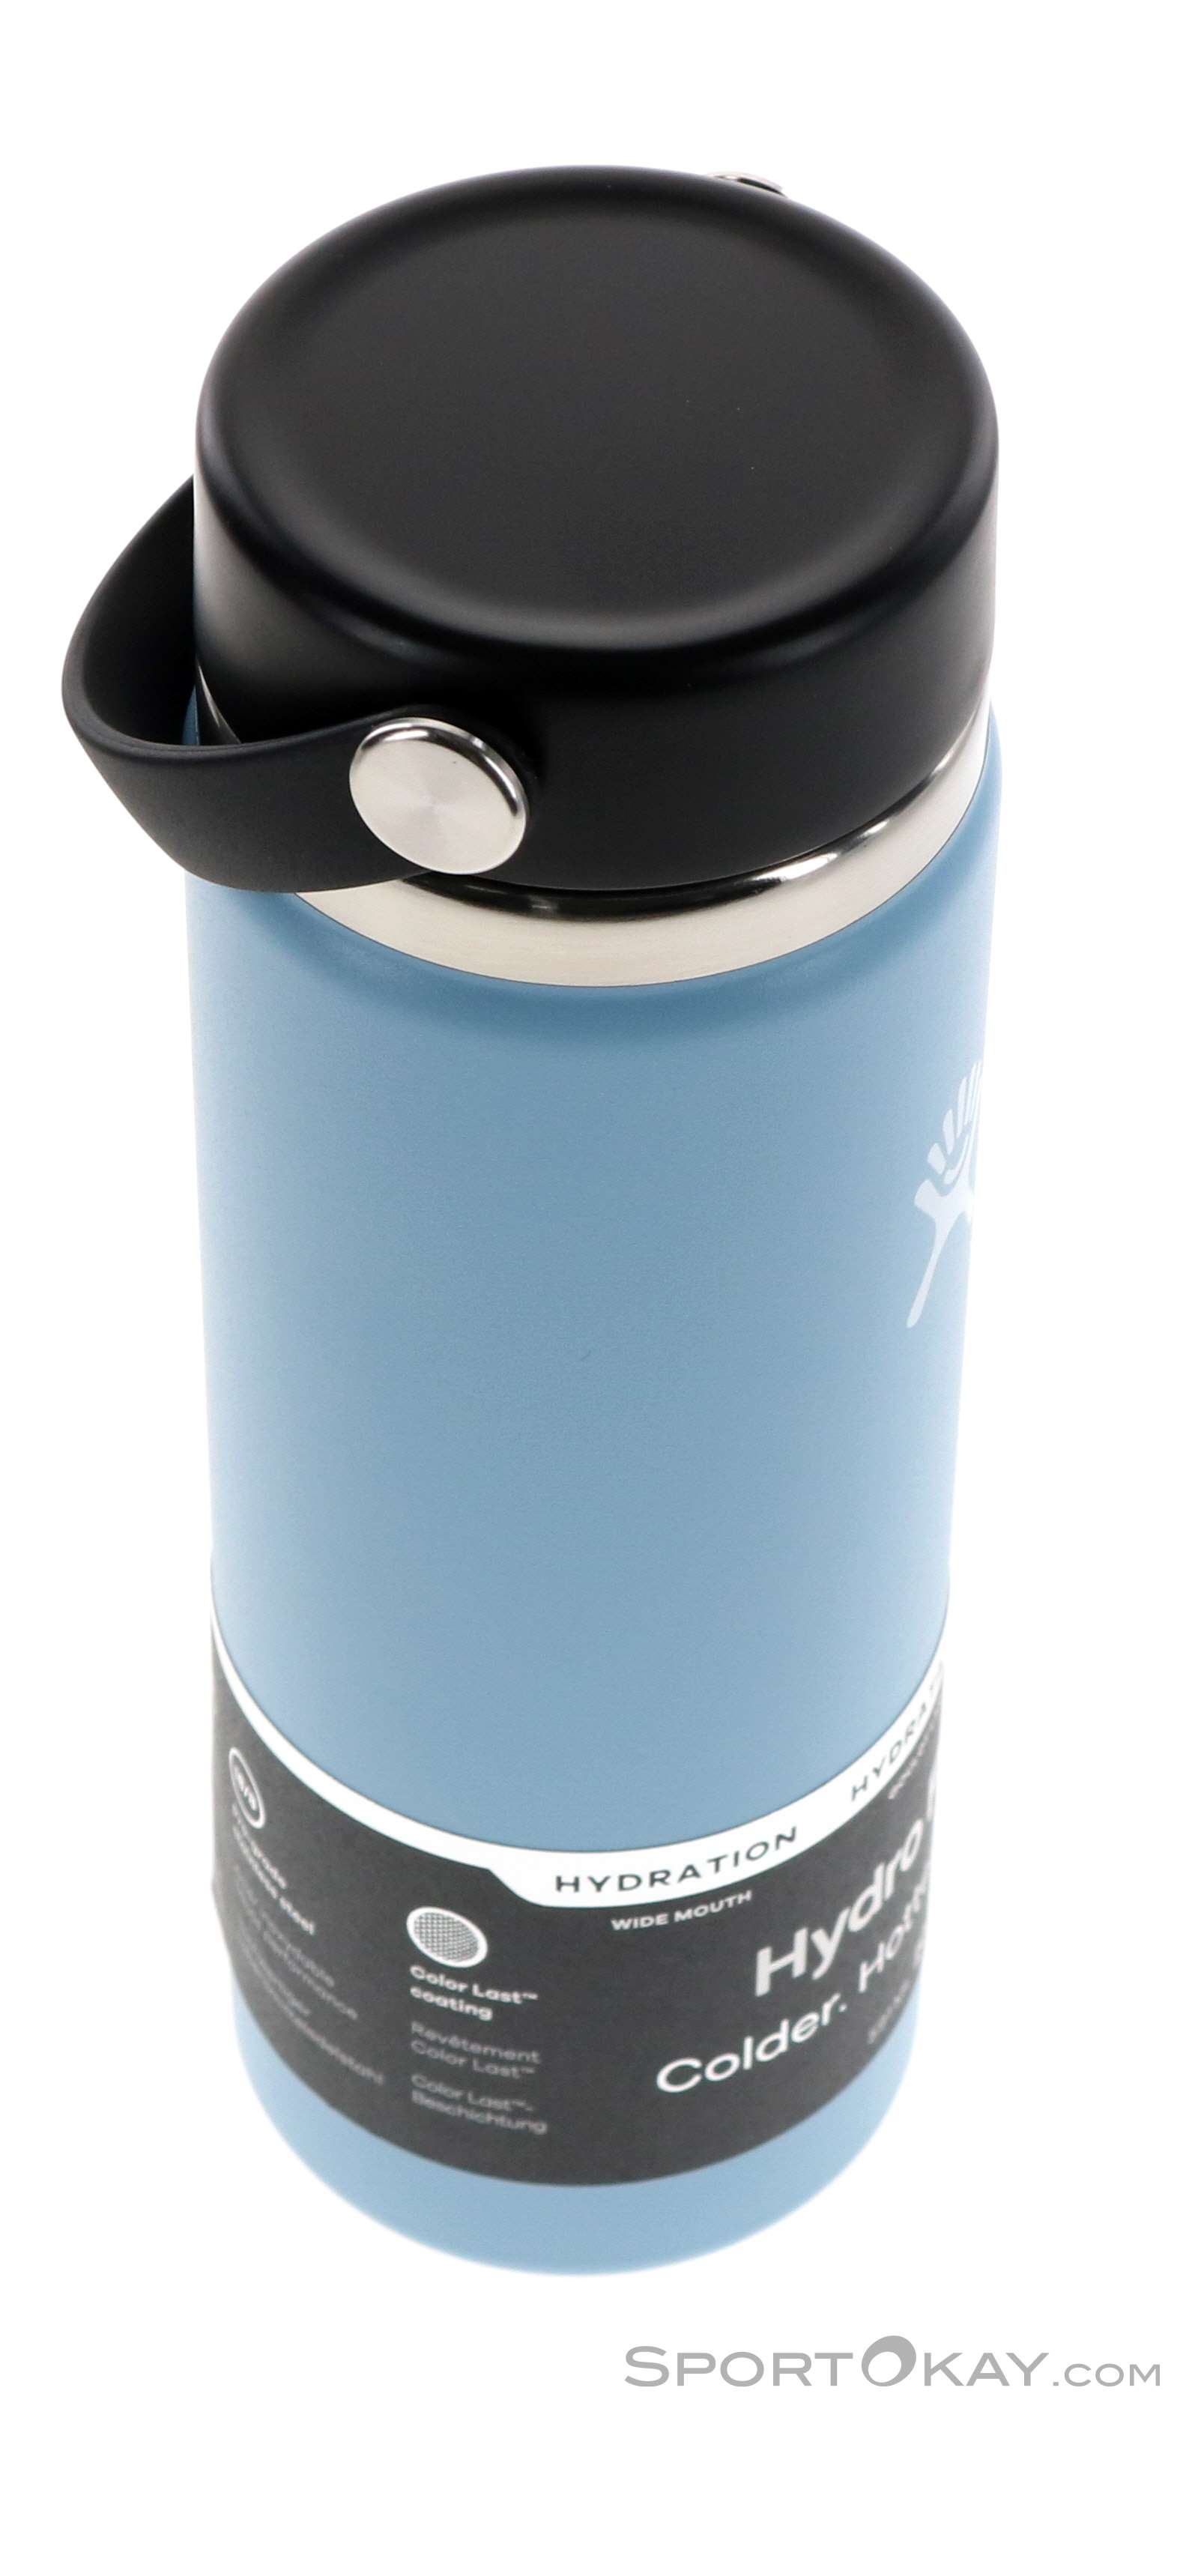 Hydro Flask 20oz Wide Mouth 591ml Thermos Bottle - Water Bottles - Fitness  Accessory - Fitness - All